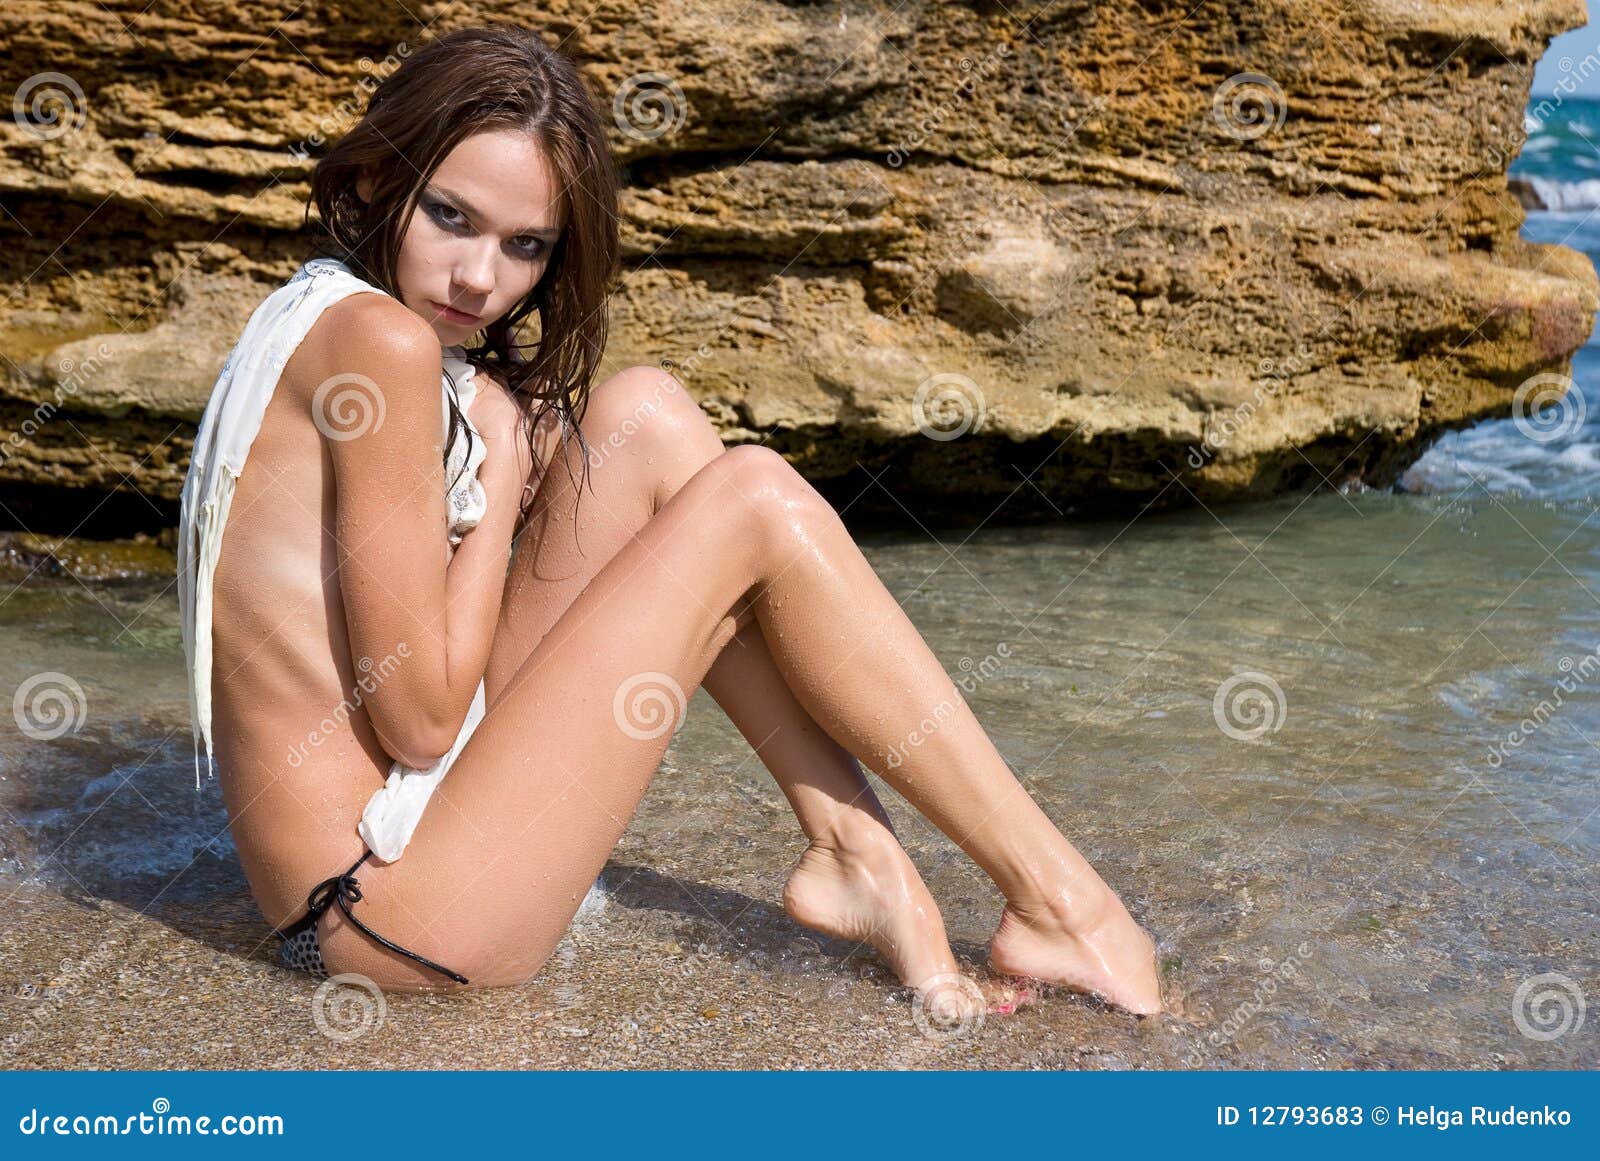 Nude Young Girl in the Beach Stock Image picture